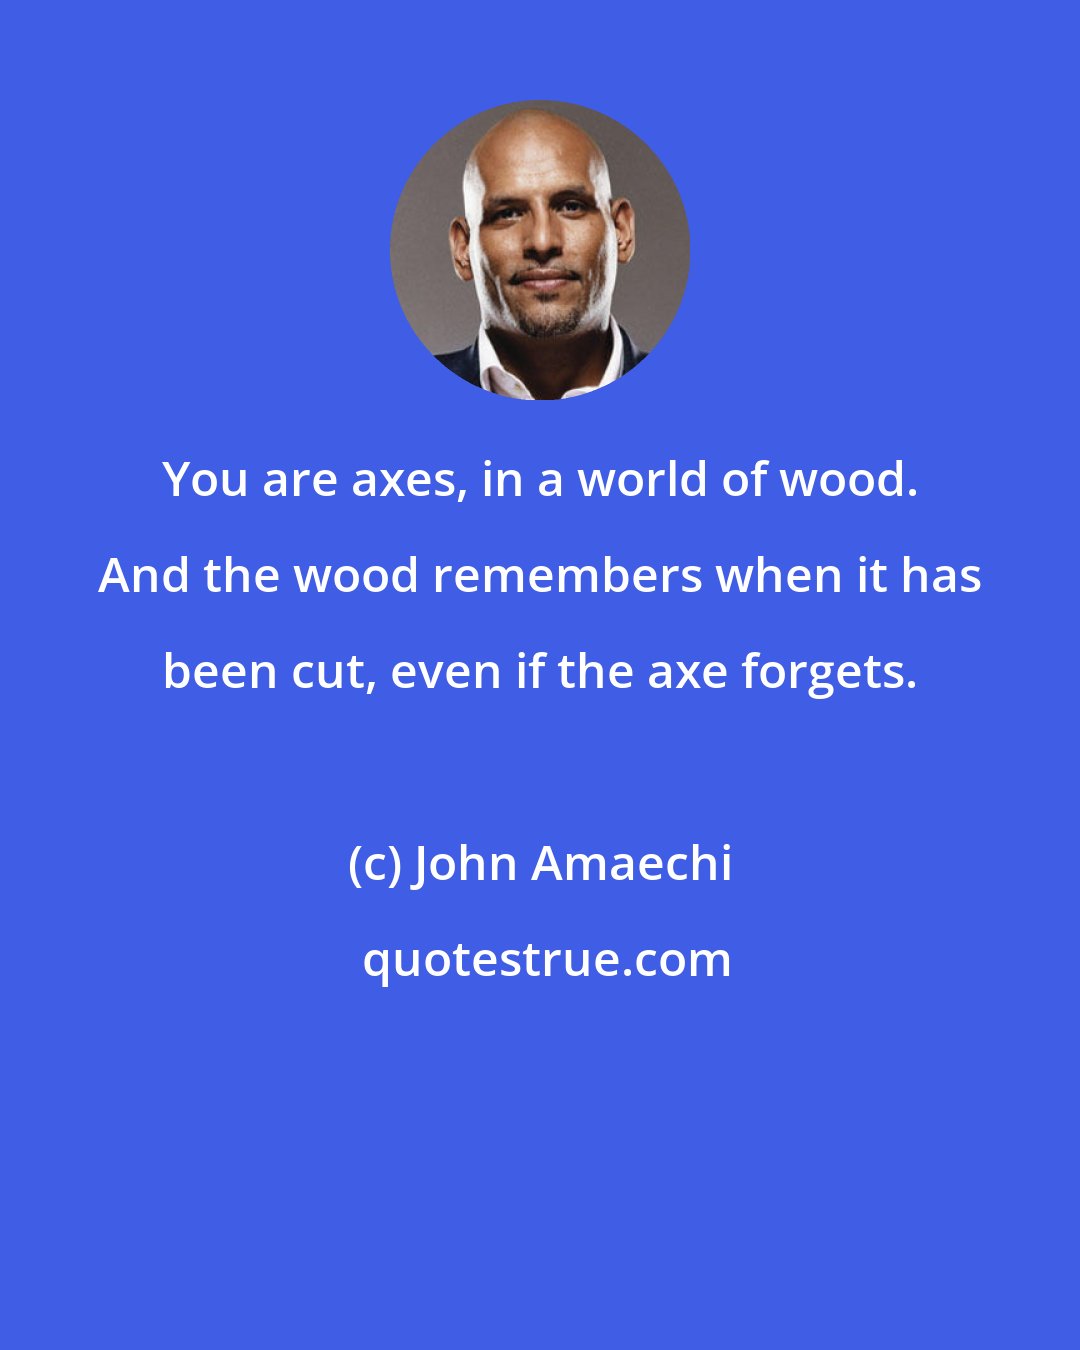 John Amaechi: You are axes, in a world of wood. And the wood remembers when it has been cut, even if the axe forgets.